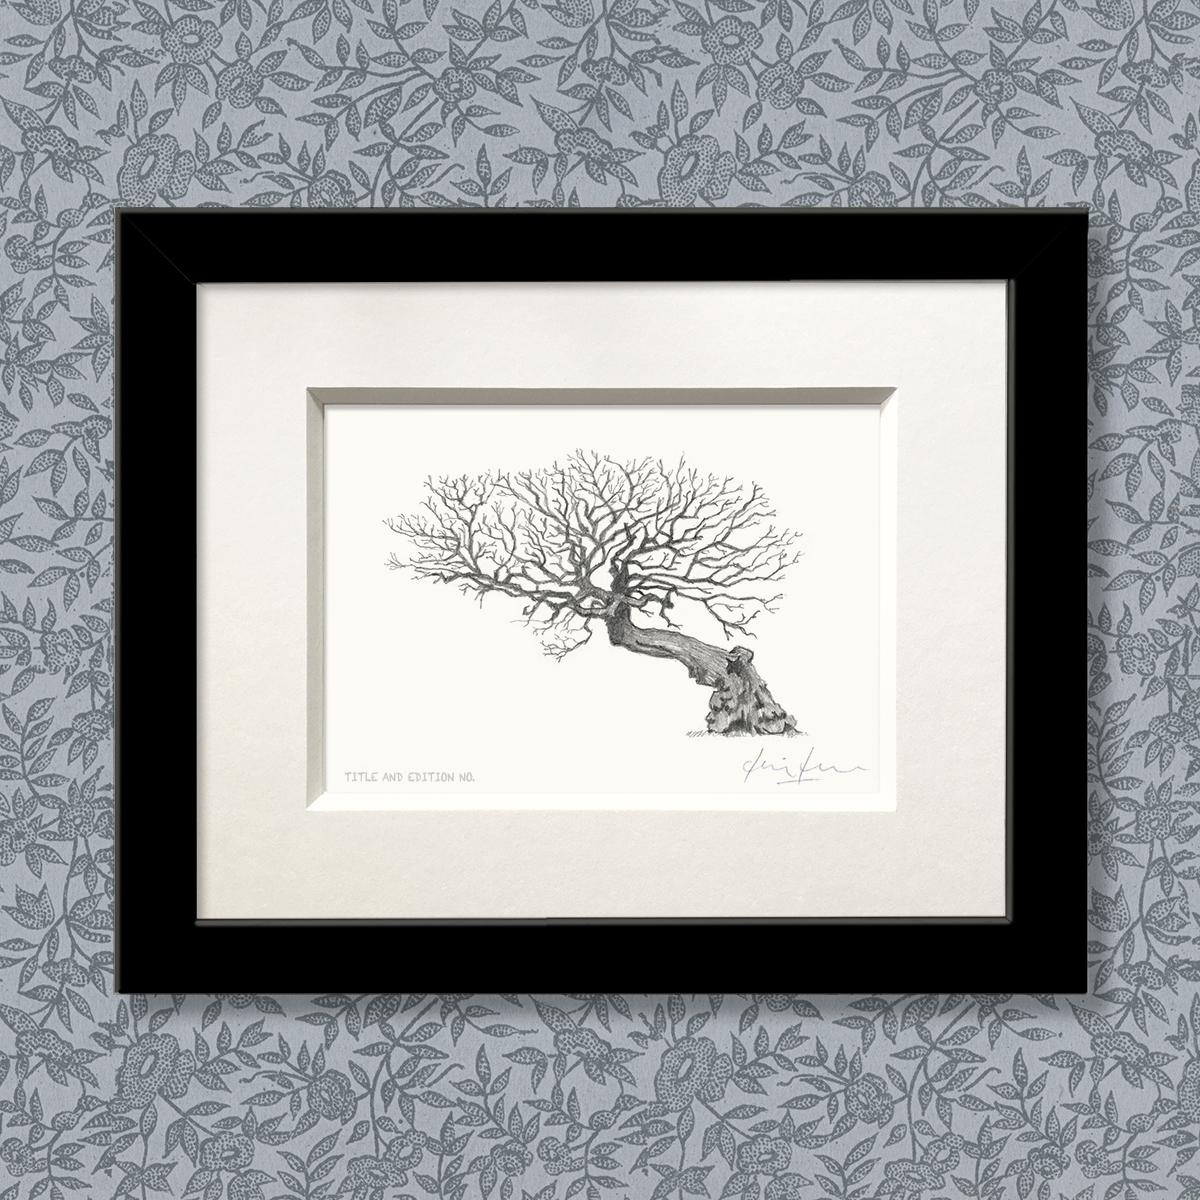 Limited edition print from pencil drawing of an old tree in a black frame